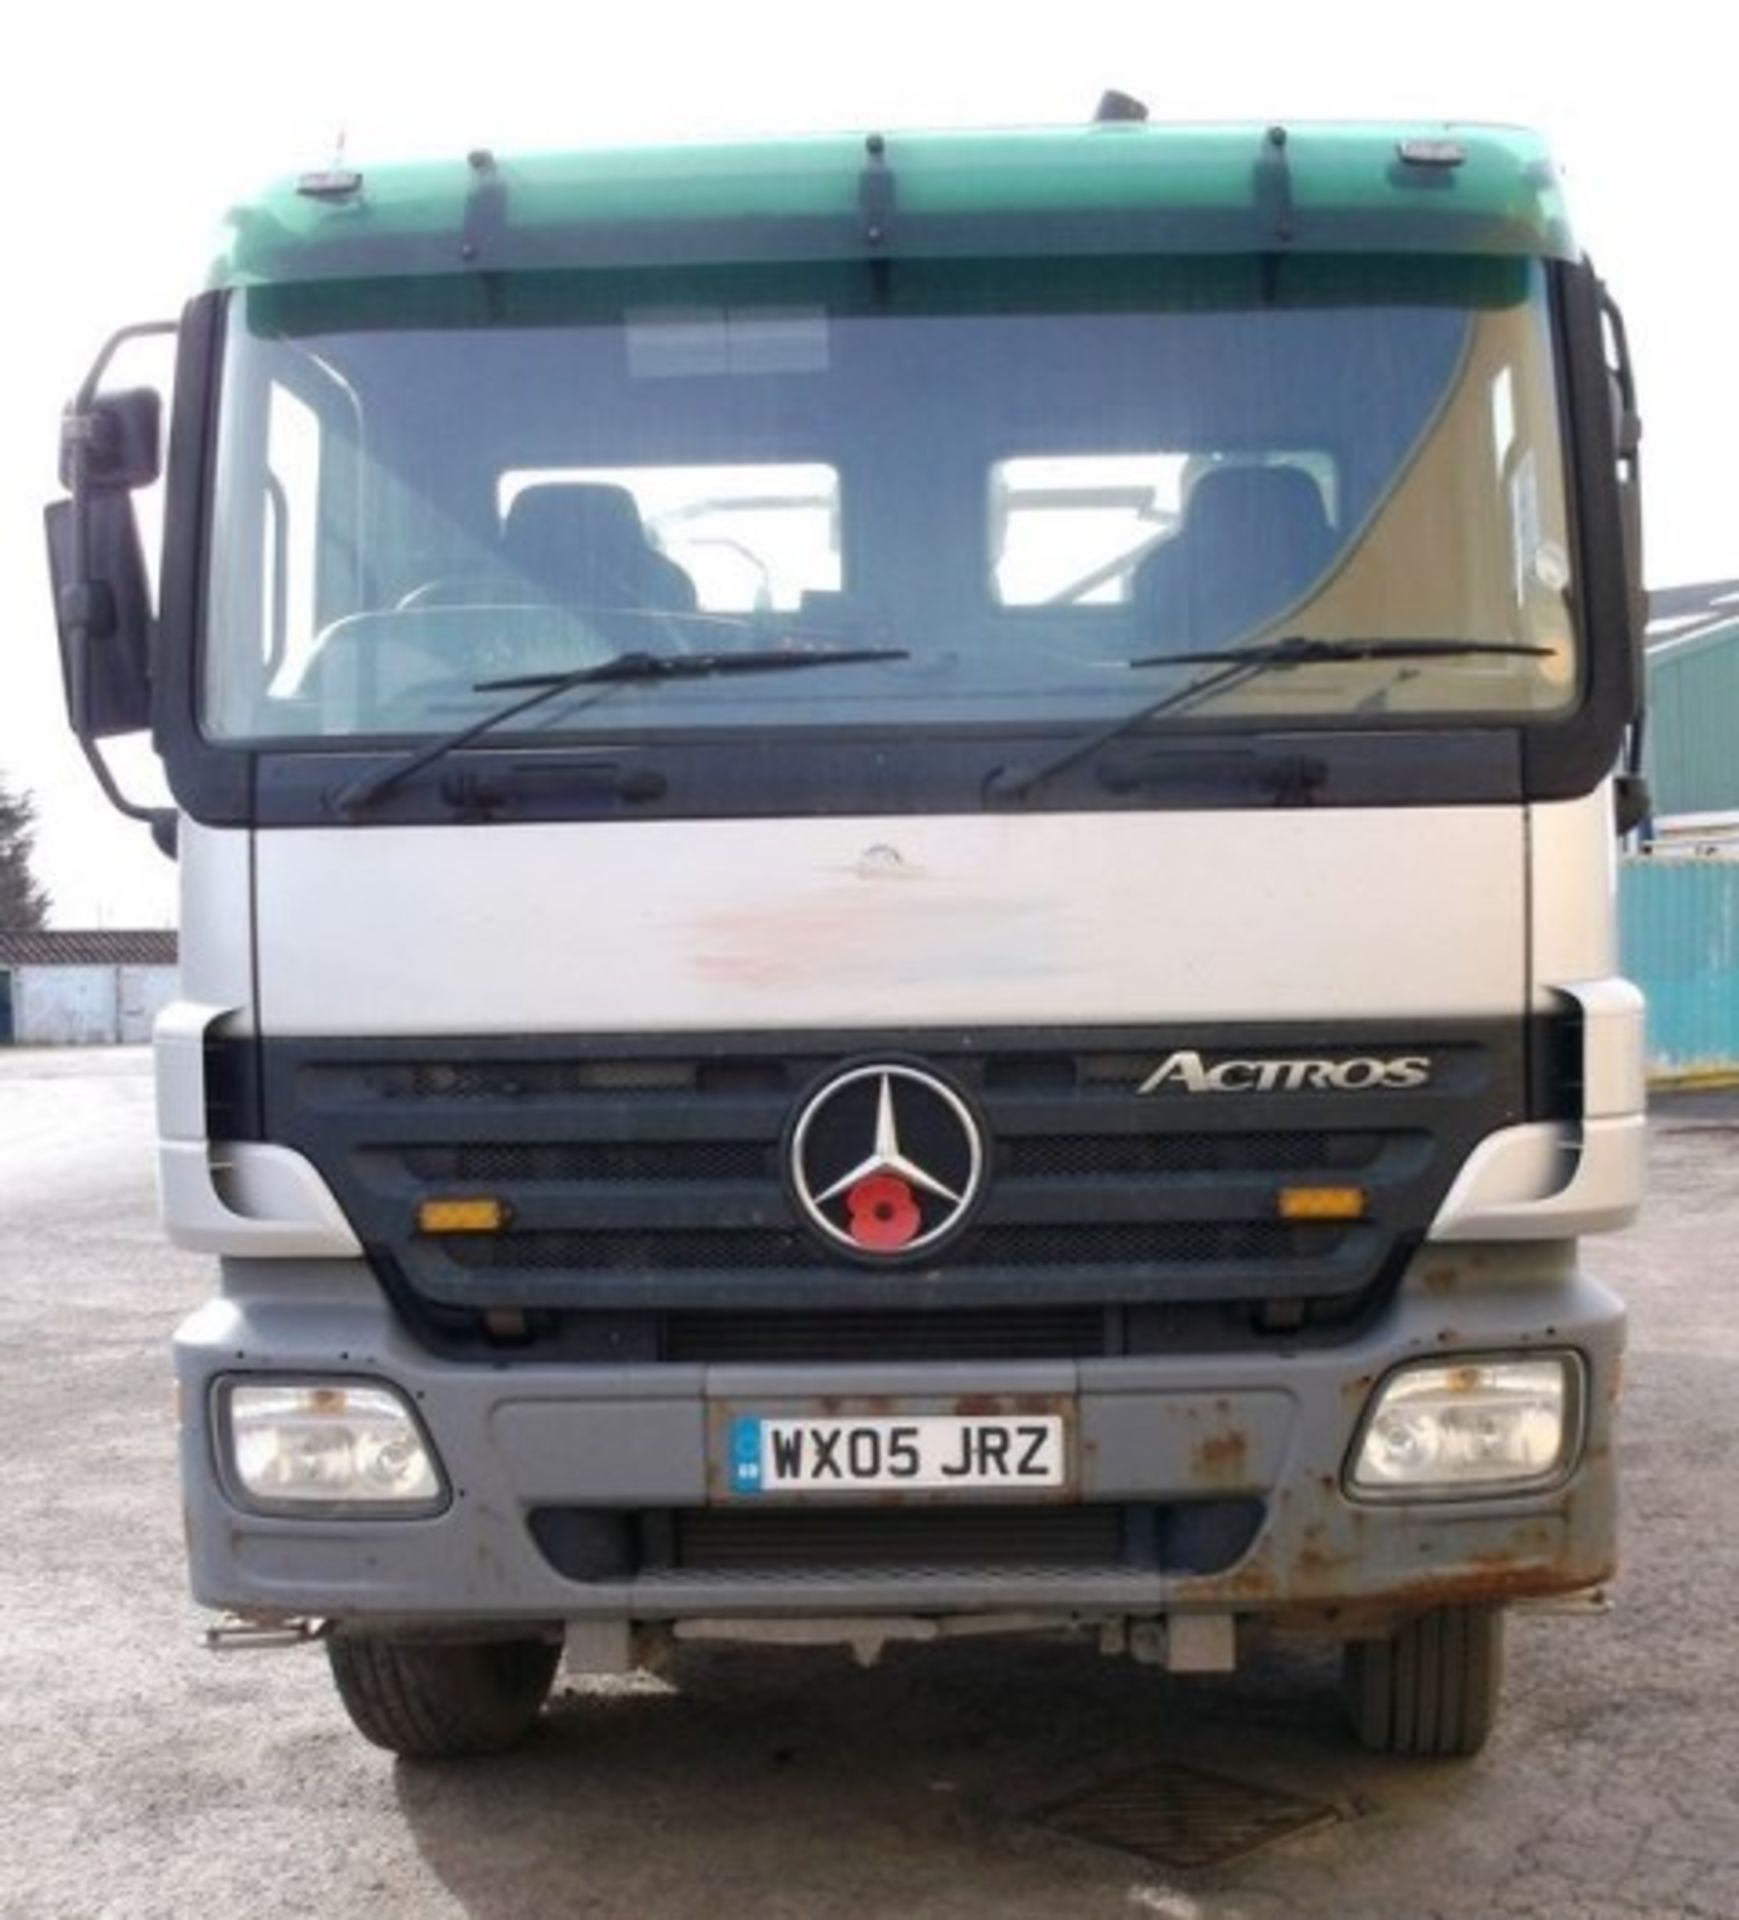 MERCEDES ACTROS 3236k - 11946cc -
Body: 2 Dr Truck
Color: Silver
First Reg: 08/03/2005
Doors: 2
MOT: - Image 11 of 18